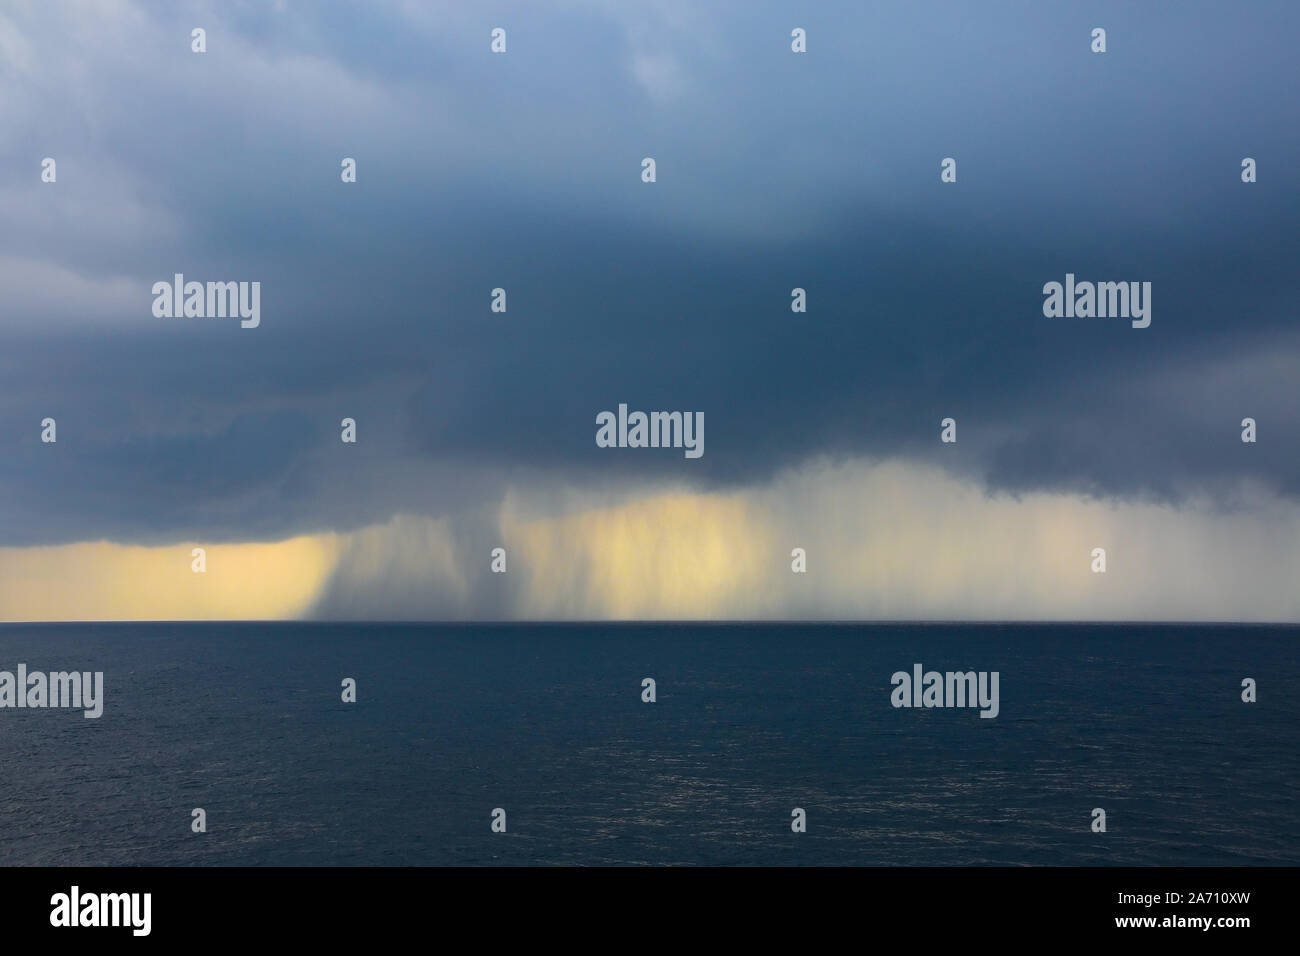 Rain & storms over the ocean, on a grey clound day at sea. Stock Photo